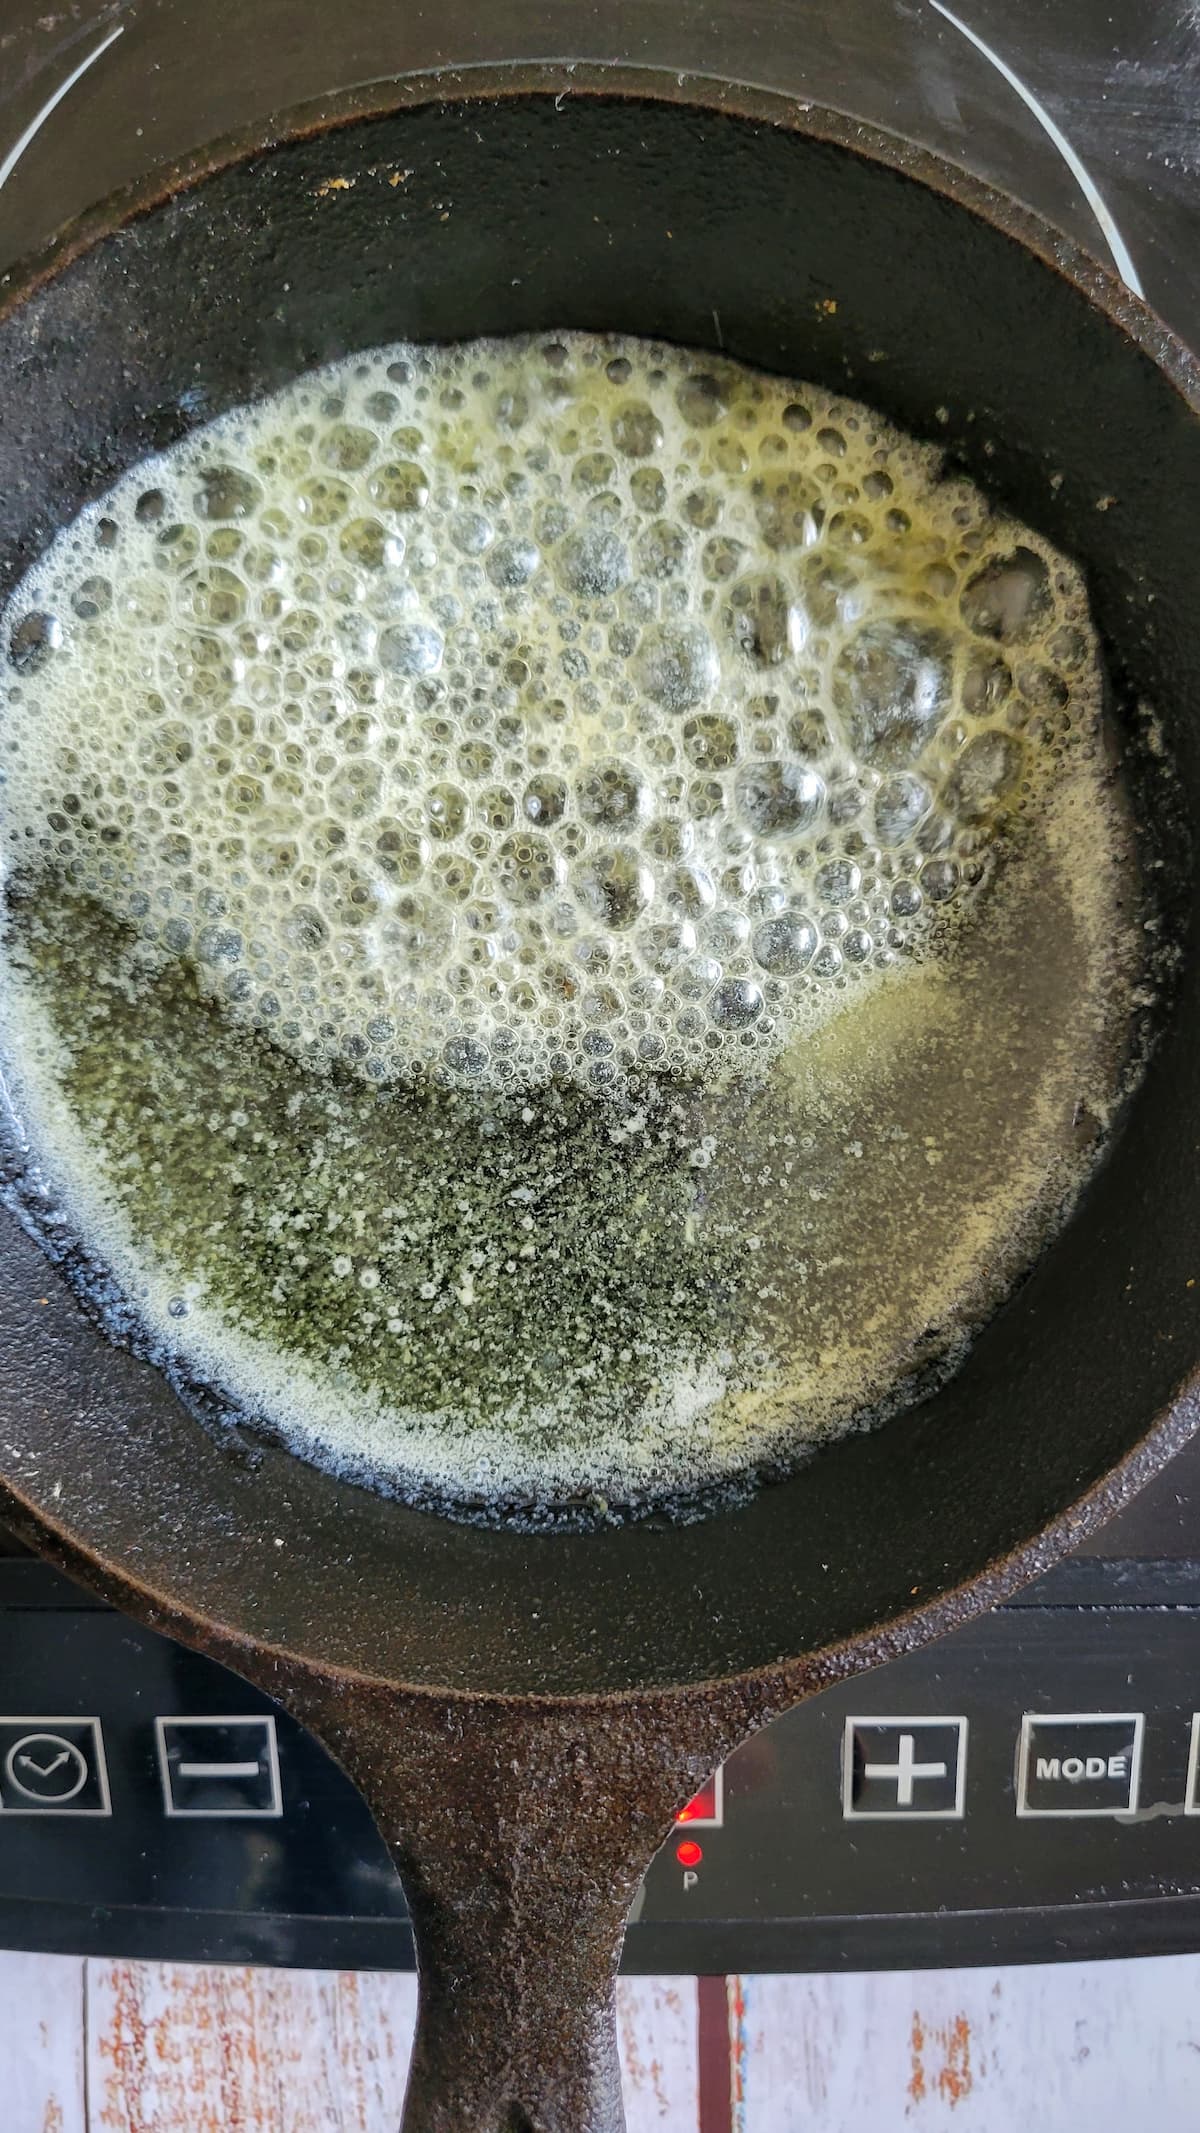 melted butter frothing in a cast iron skillet on a burner